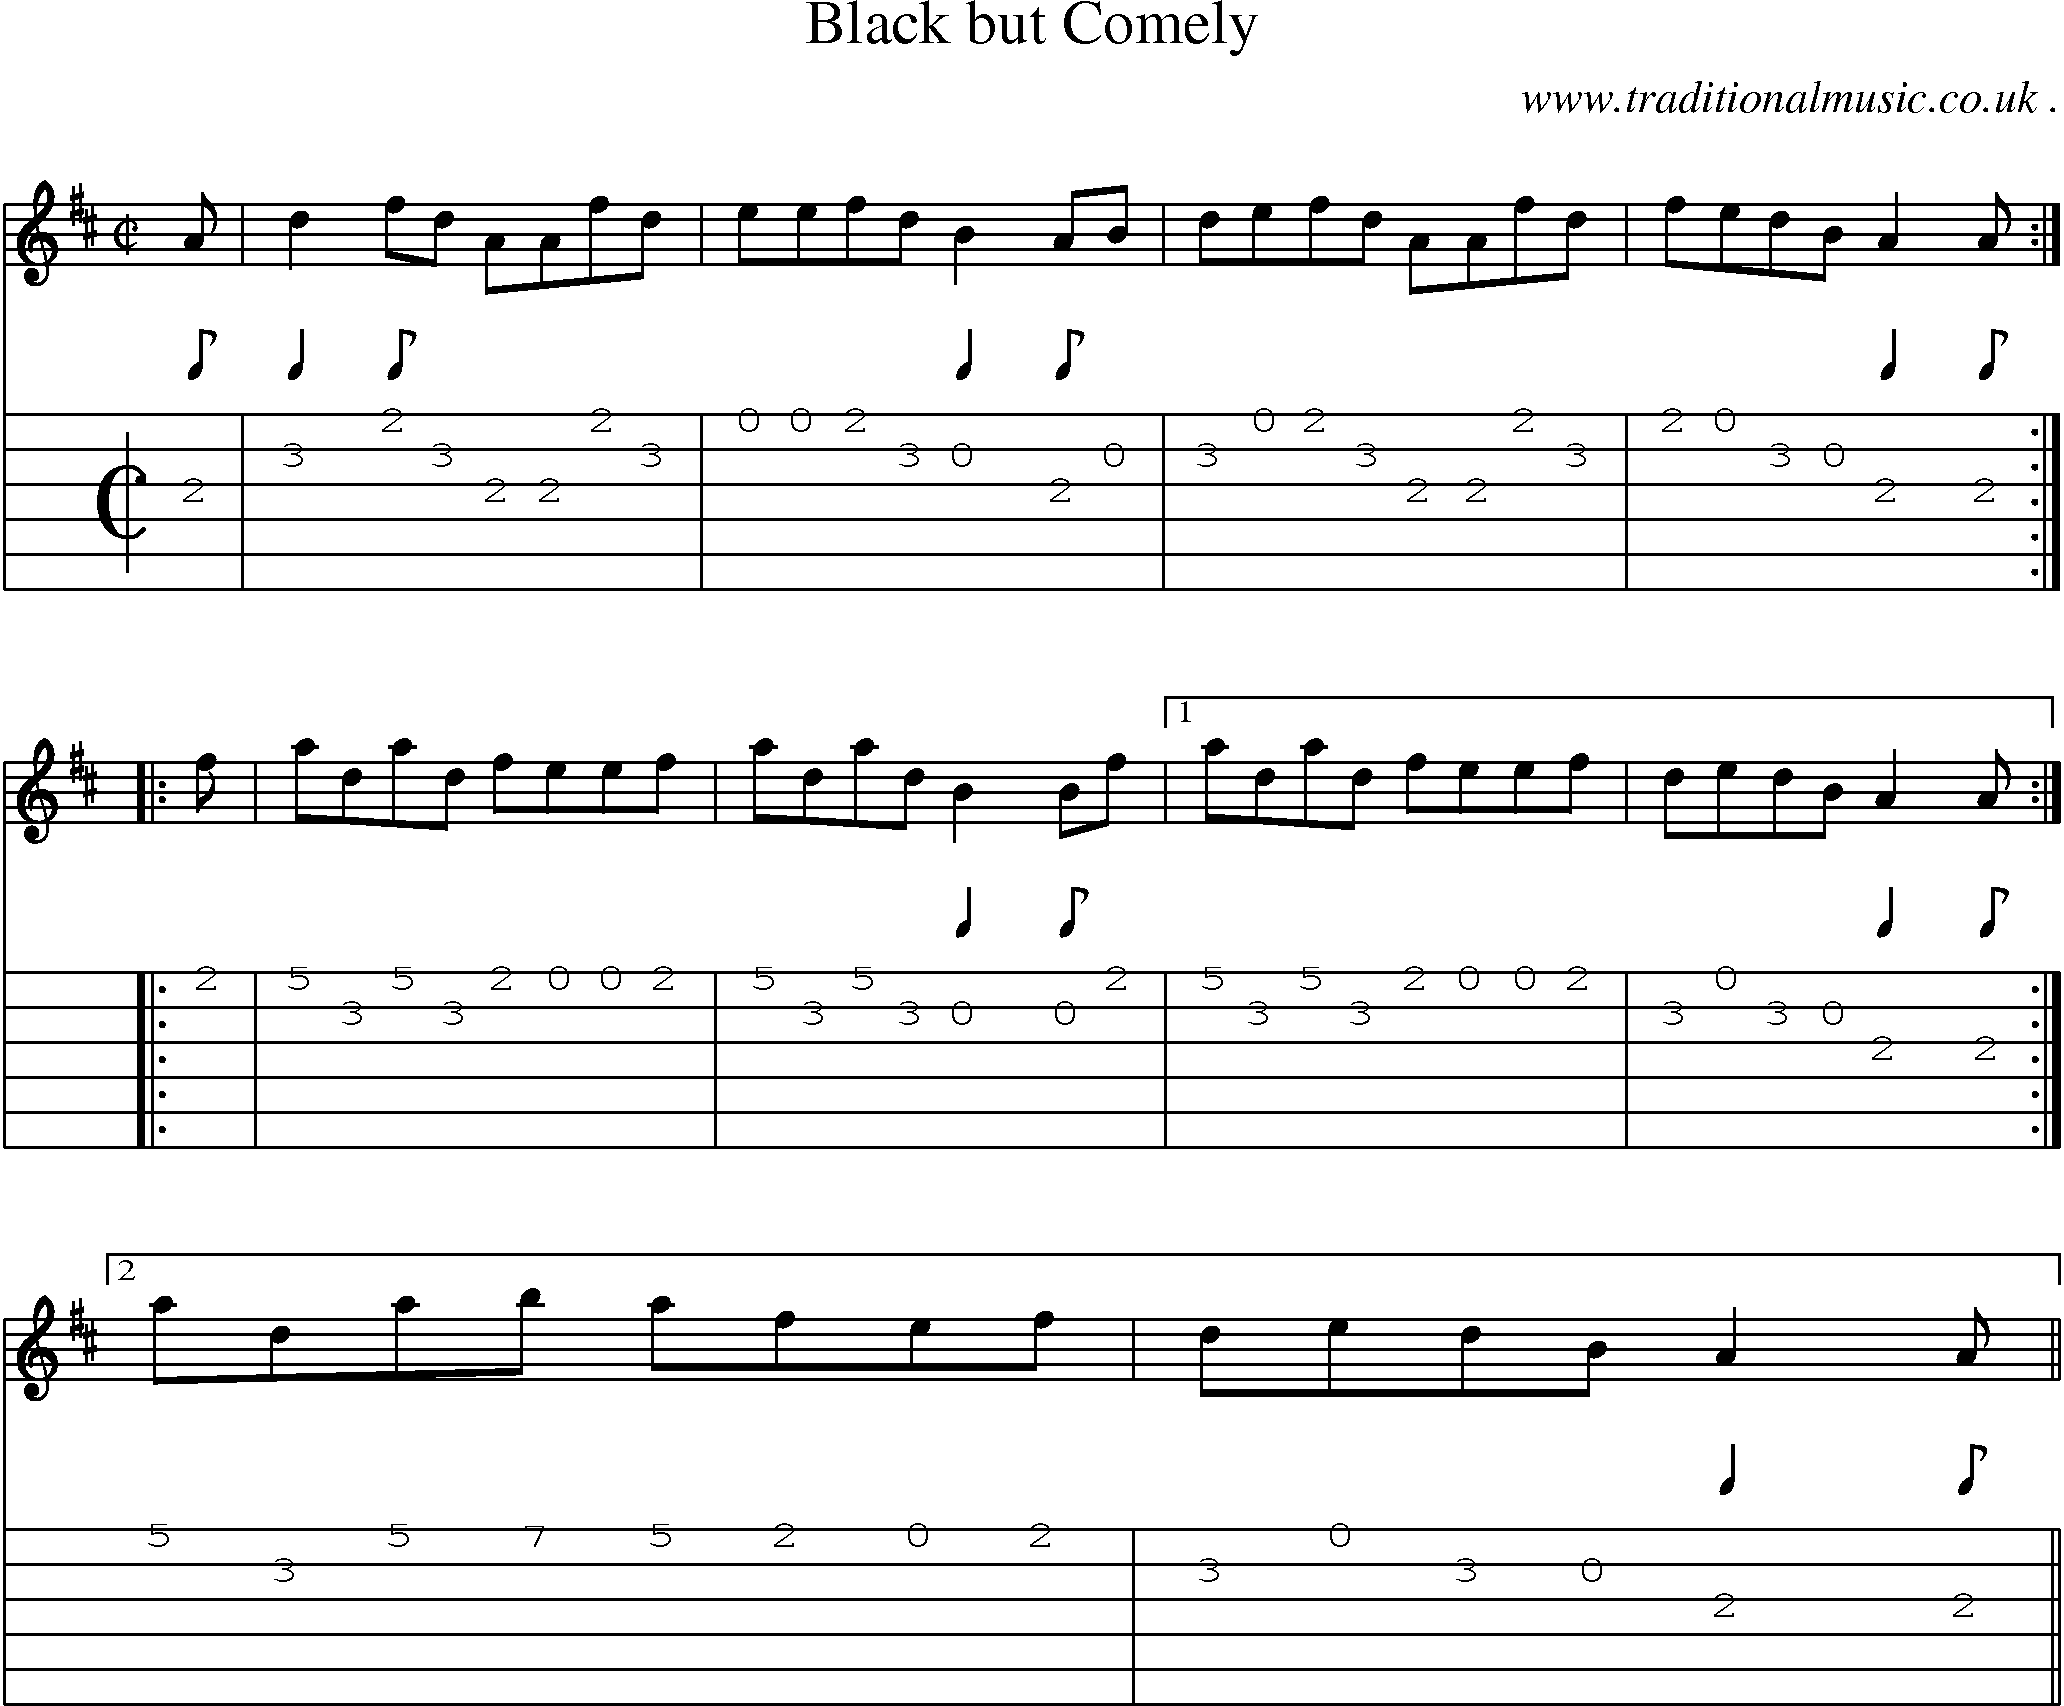 Sheet-music  score, Chords and Guitar Tabs for Black But Comely